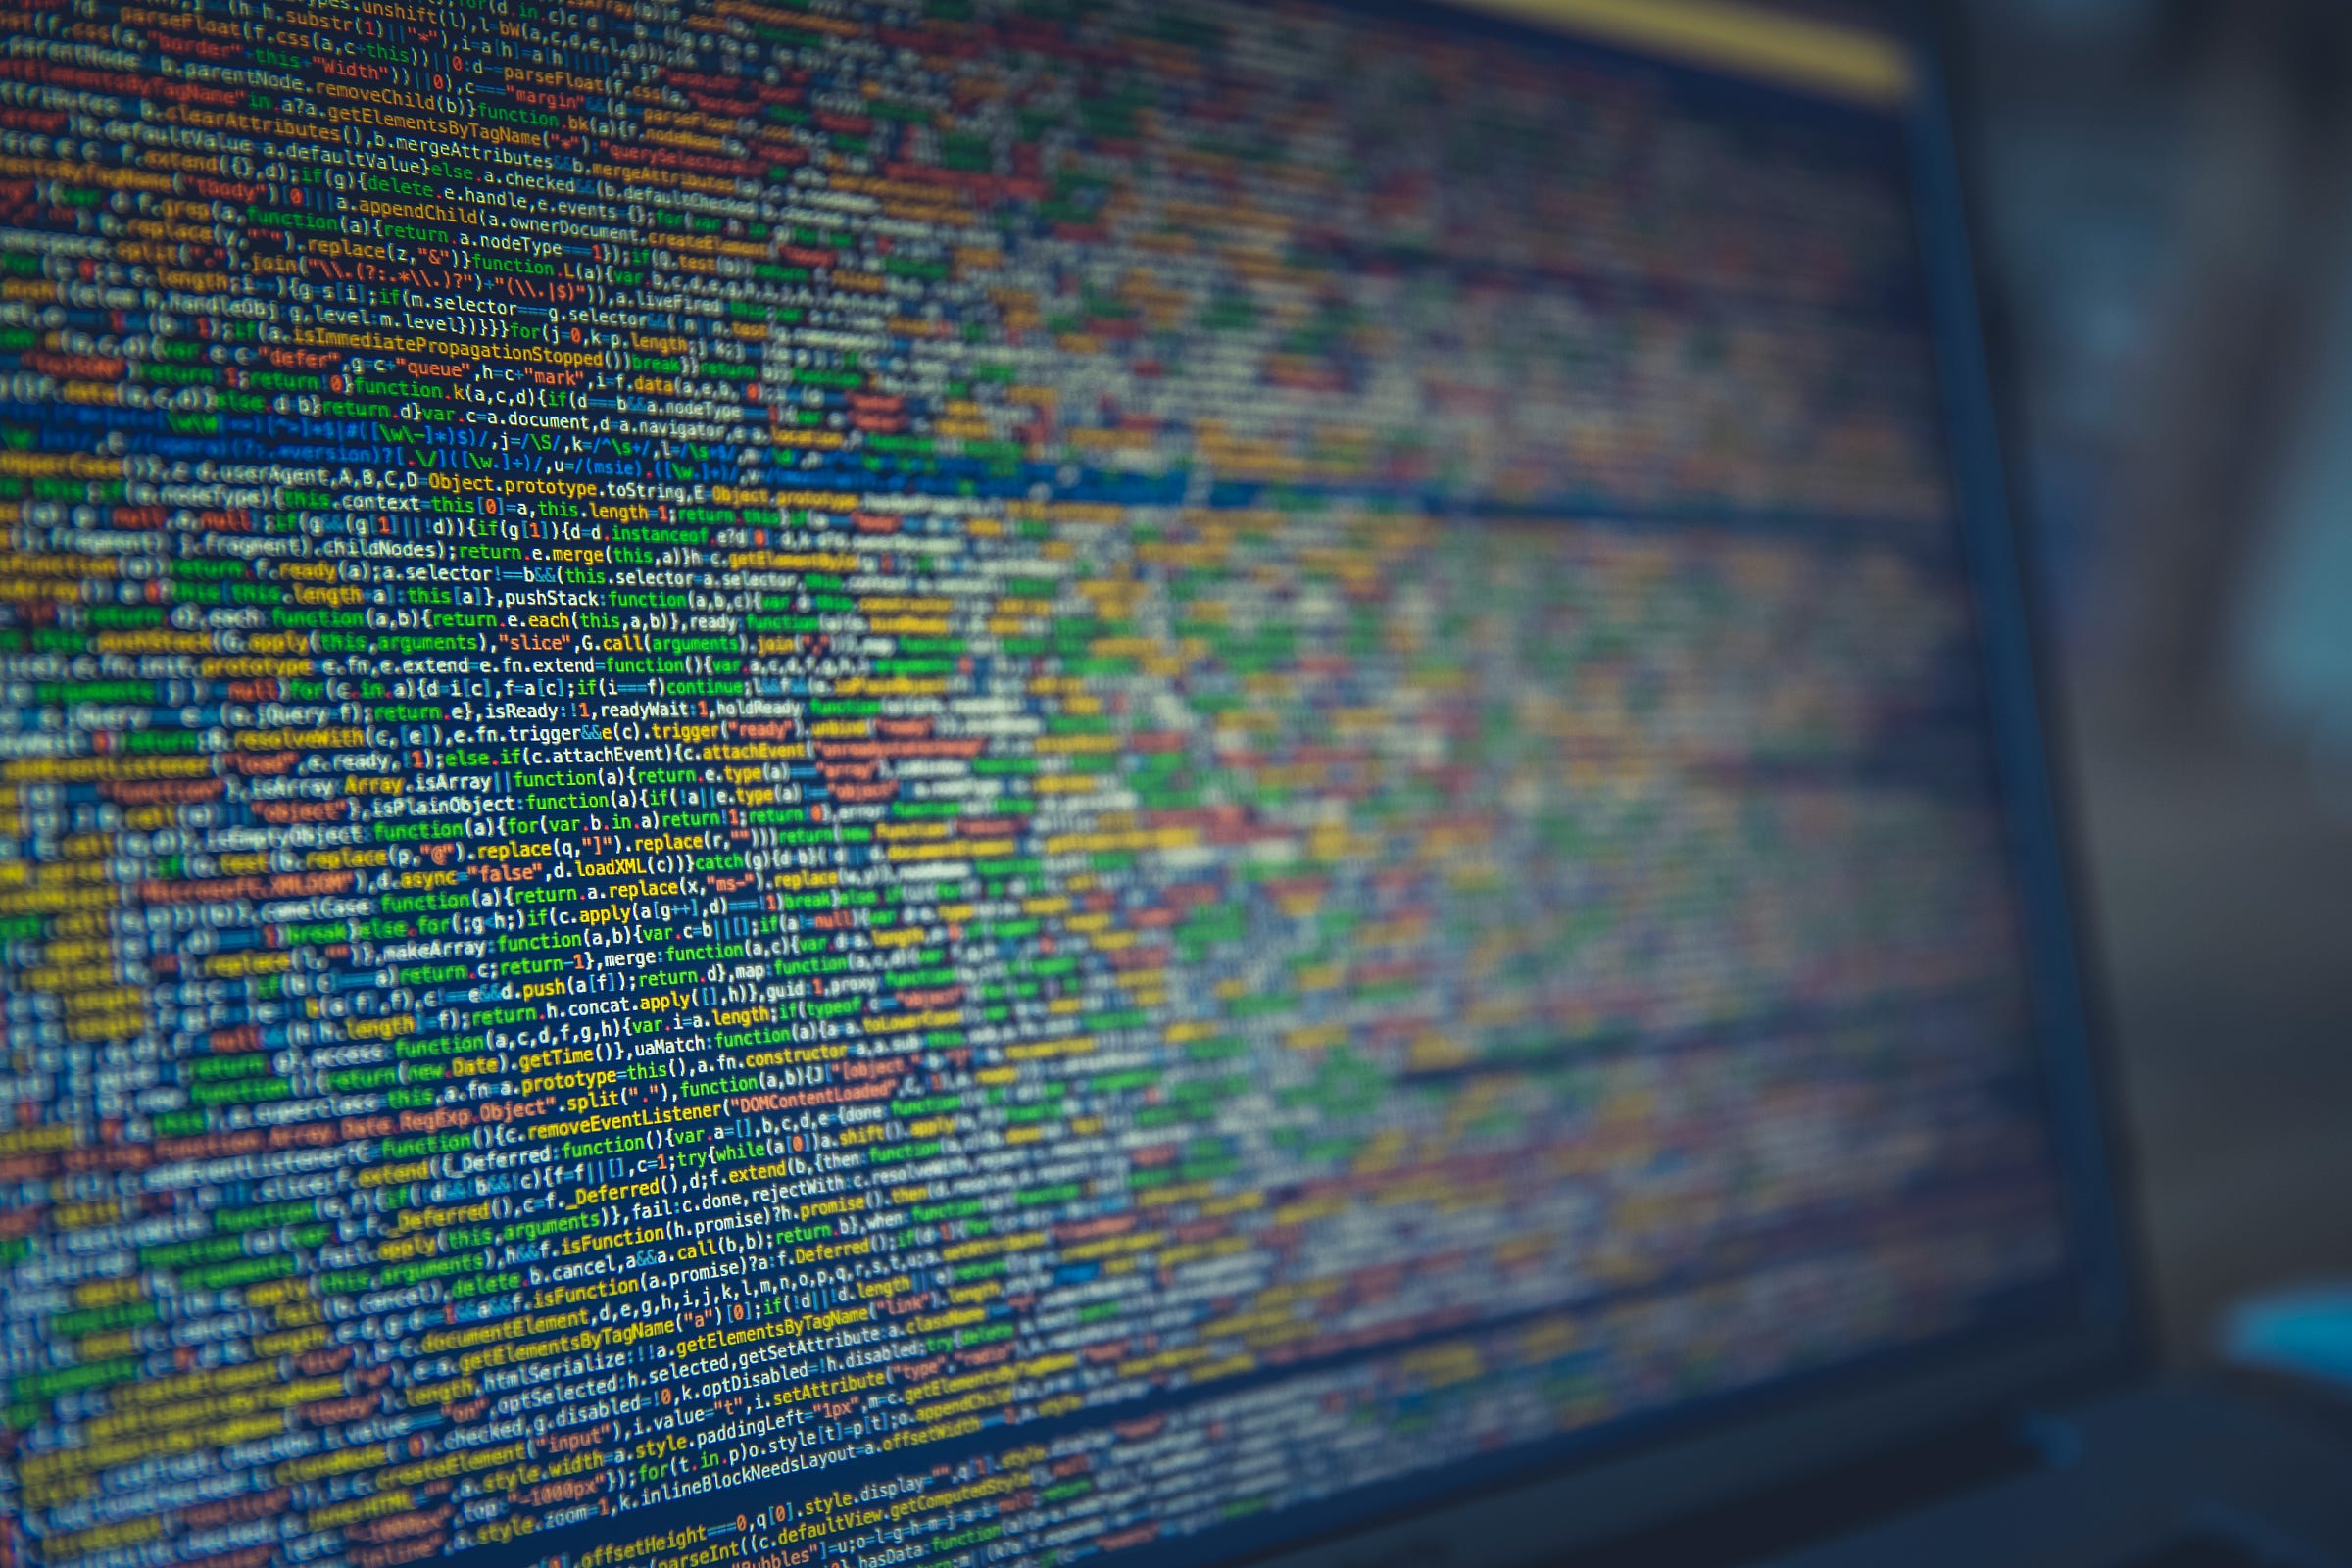 “Long colorful lines of code on a puter screen” by Markus Spiske on Unsplash